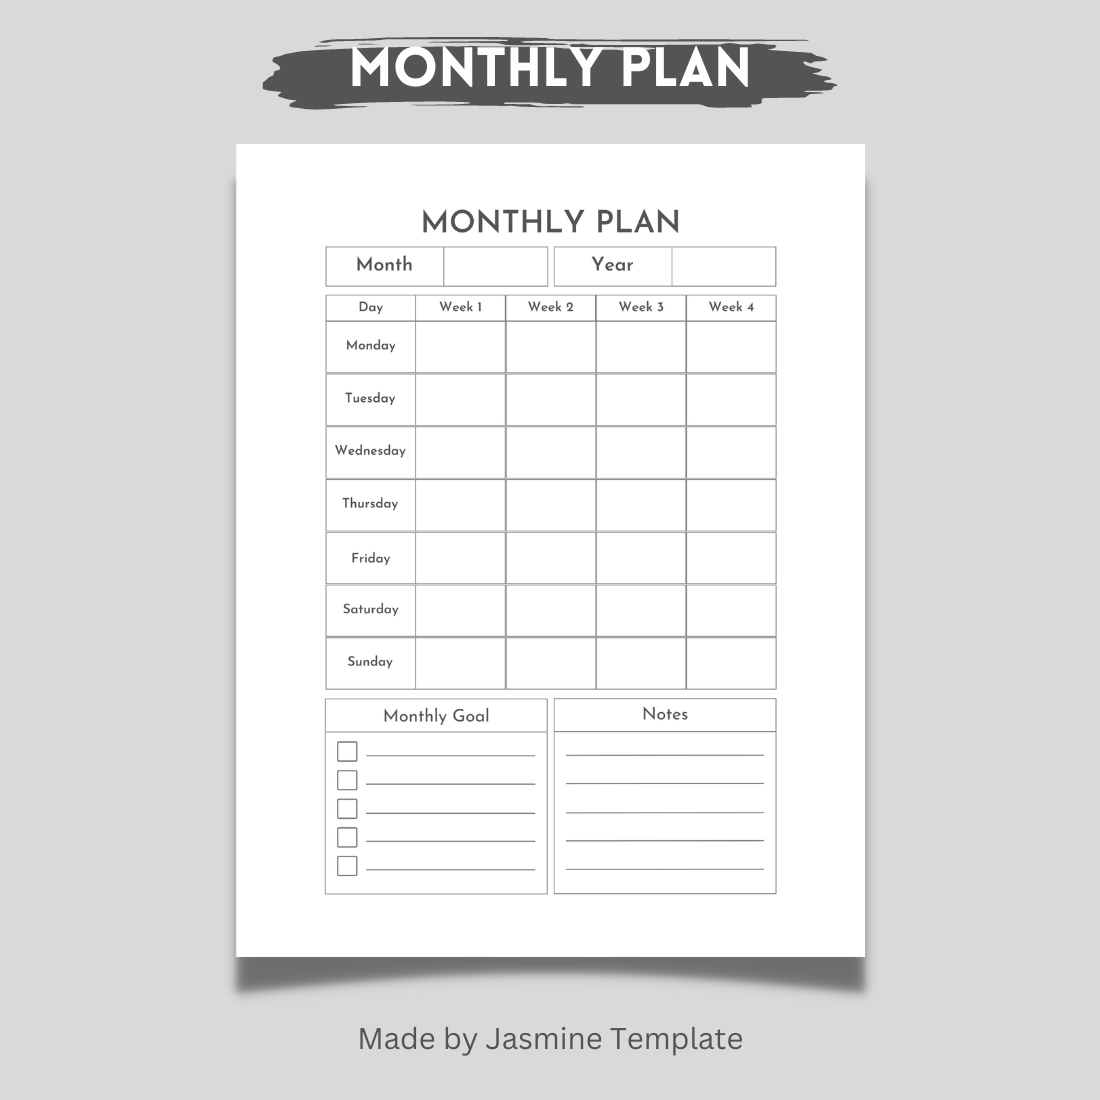 Your monthly plan.